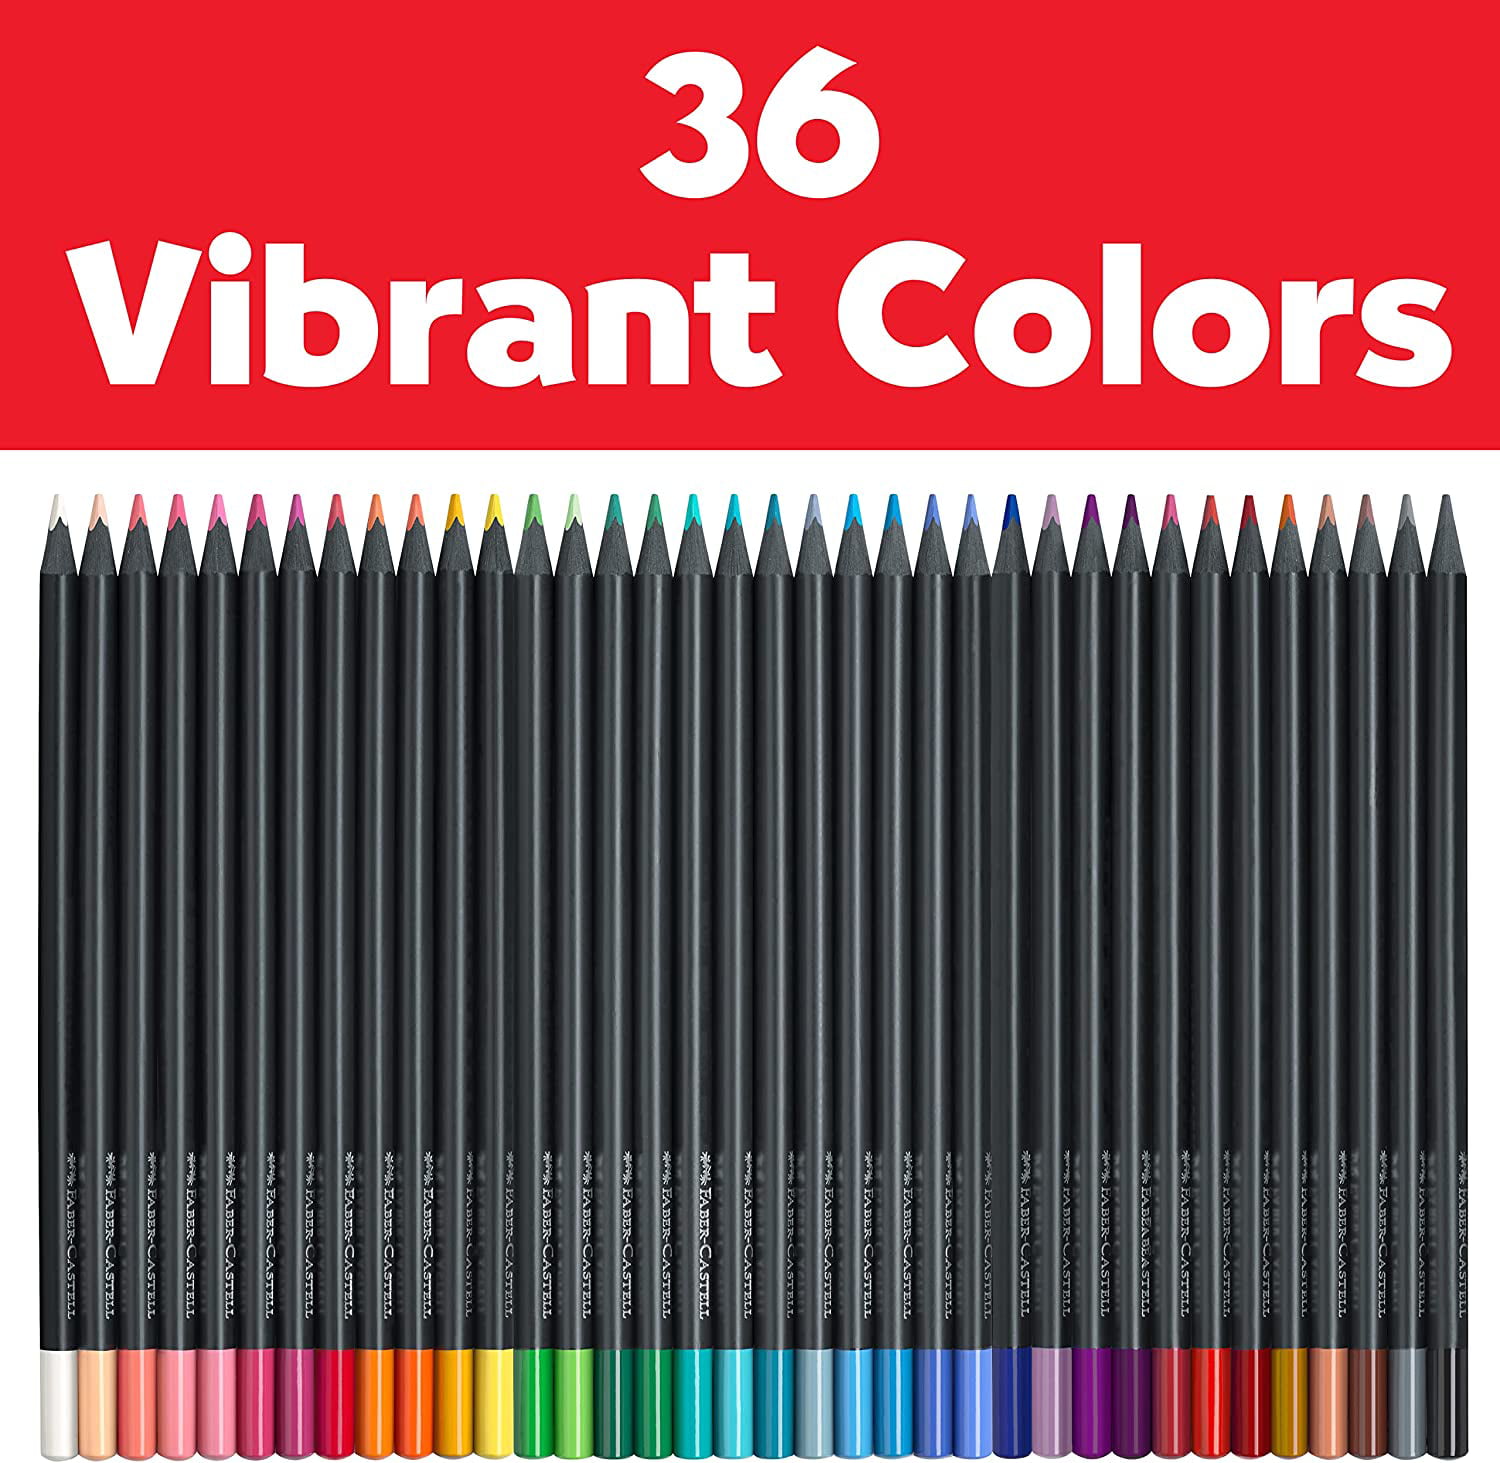 Faber-Castell Colouring Pencils - Black Edition - Pack of 36 Colors 